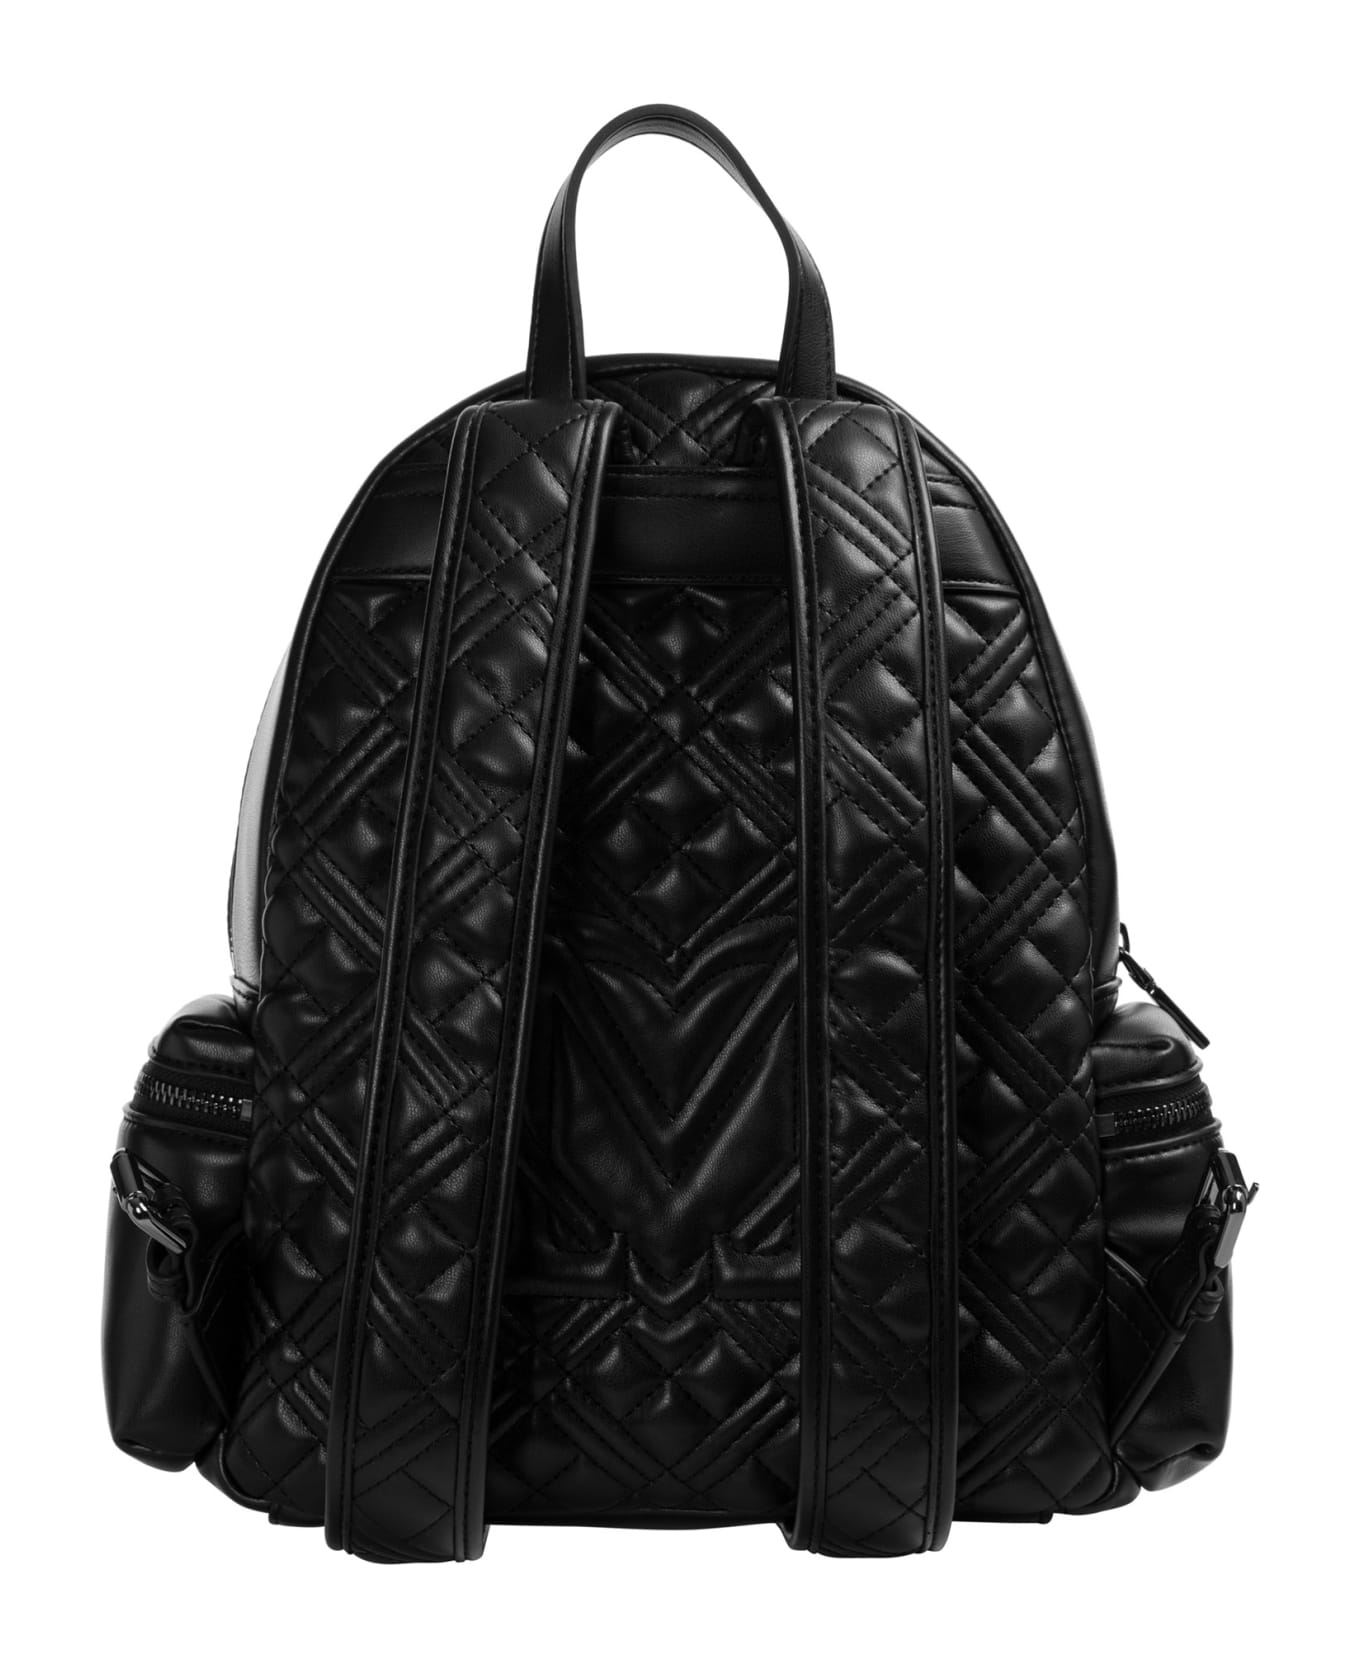 Love Moschino Backpack - A Nero バックパック